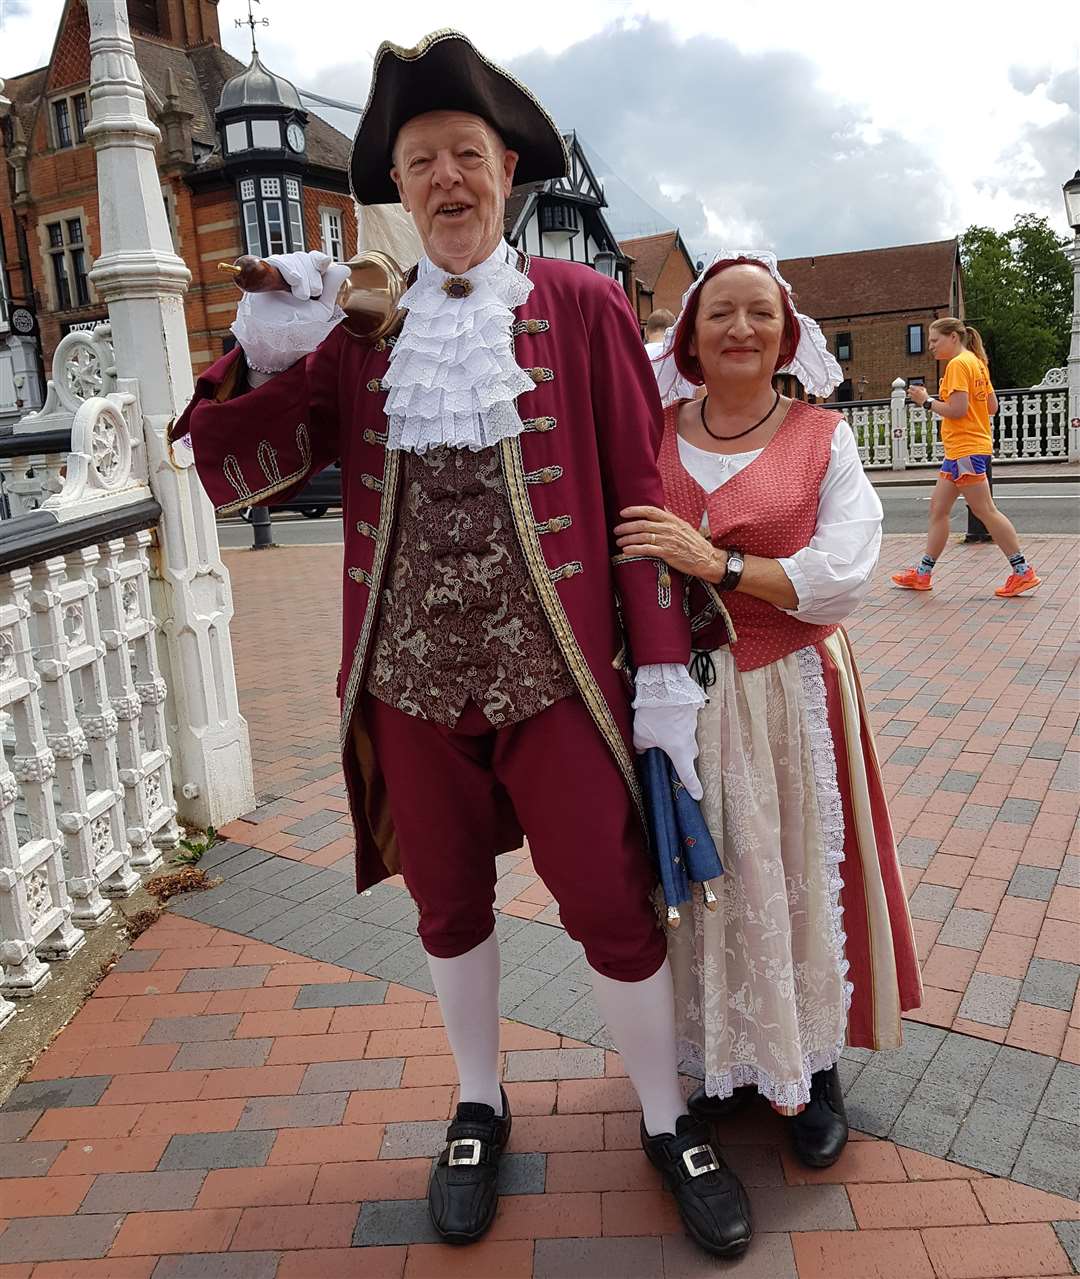 Town crier John Scholey and his wife Liz were on hand to welcome shoppers back to Tonbridge